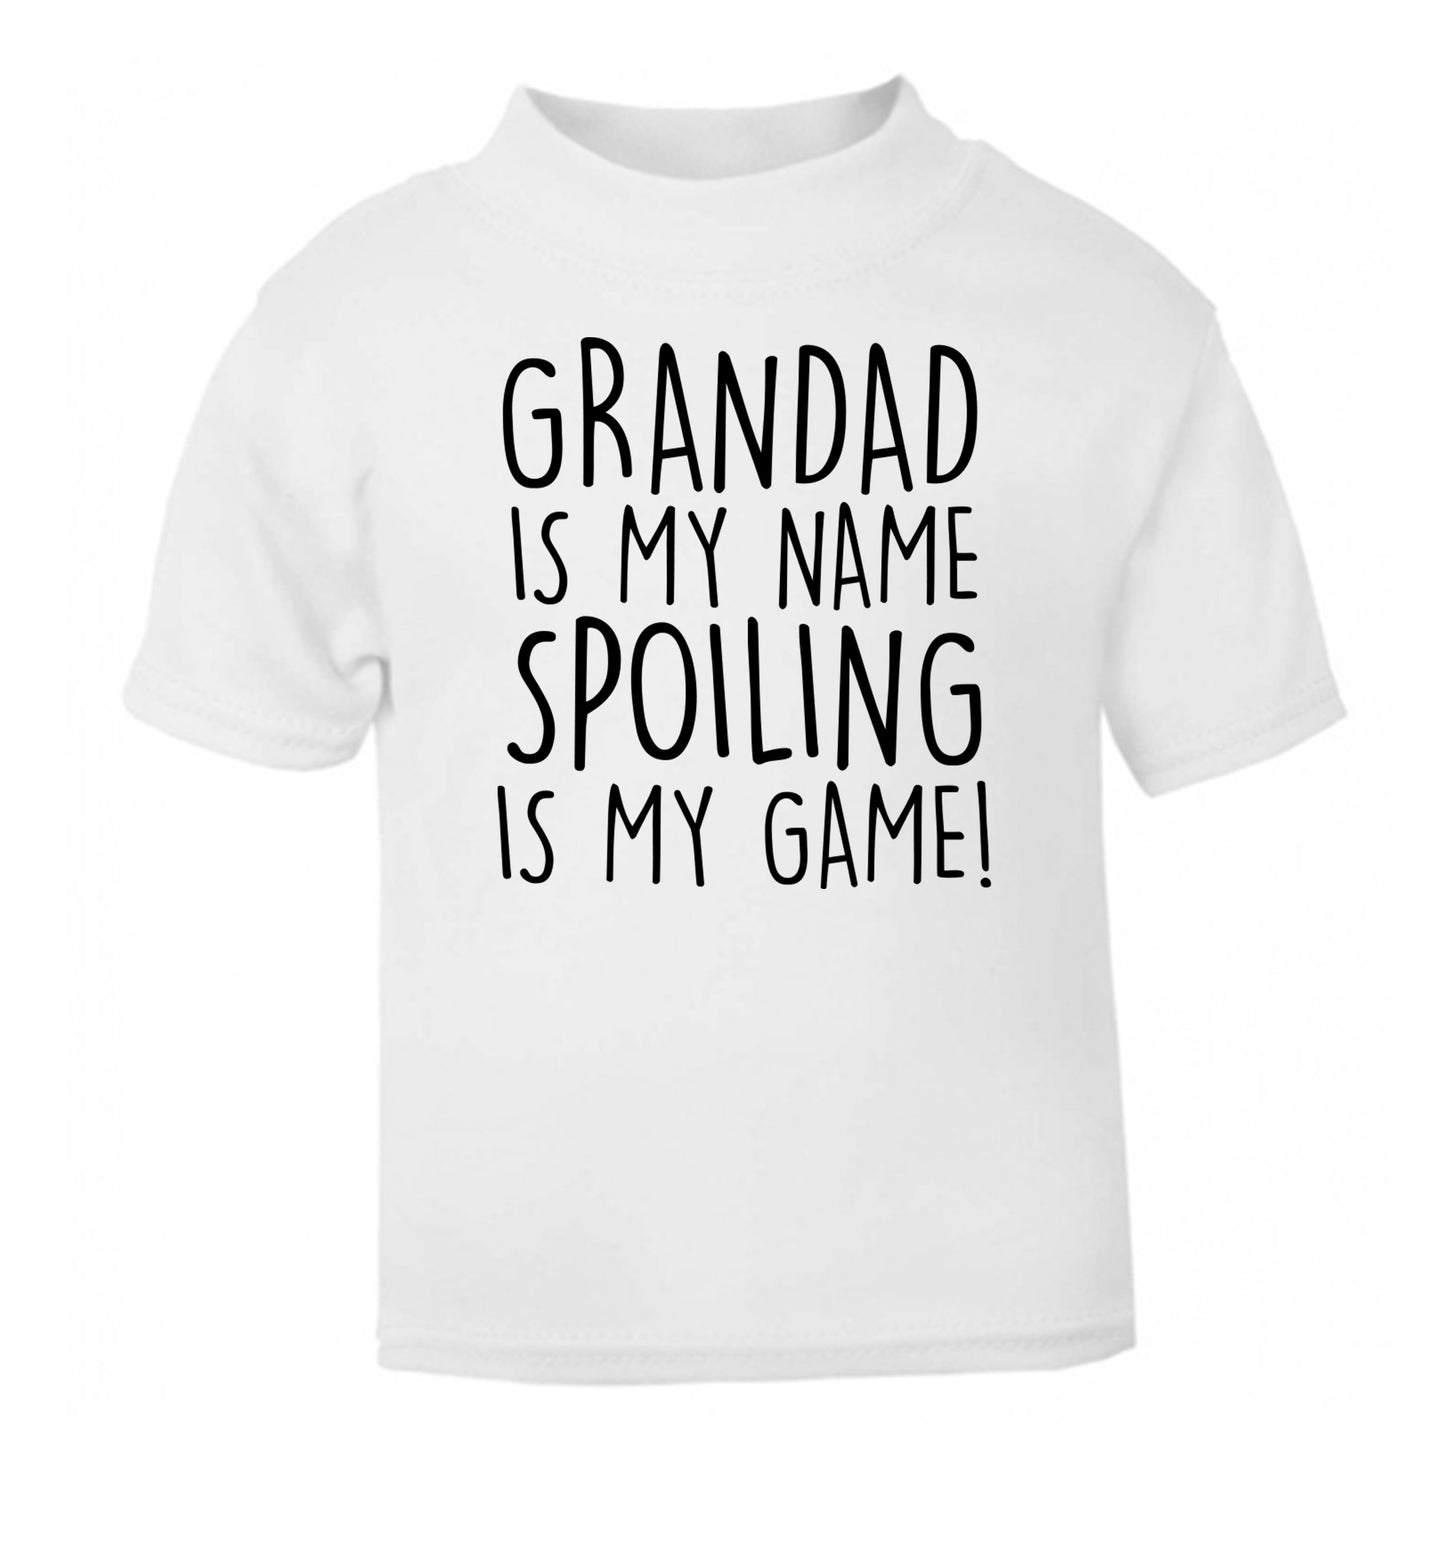 Grandad is my name, spoiling is my game white Baby Toddler Tshirt 2 Years